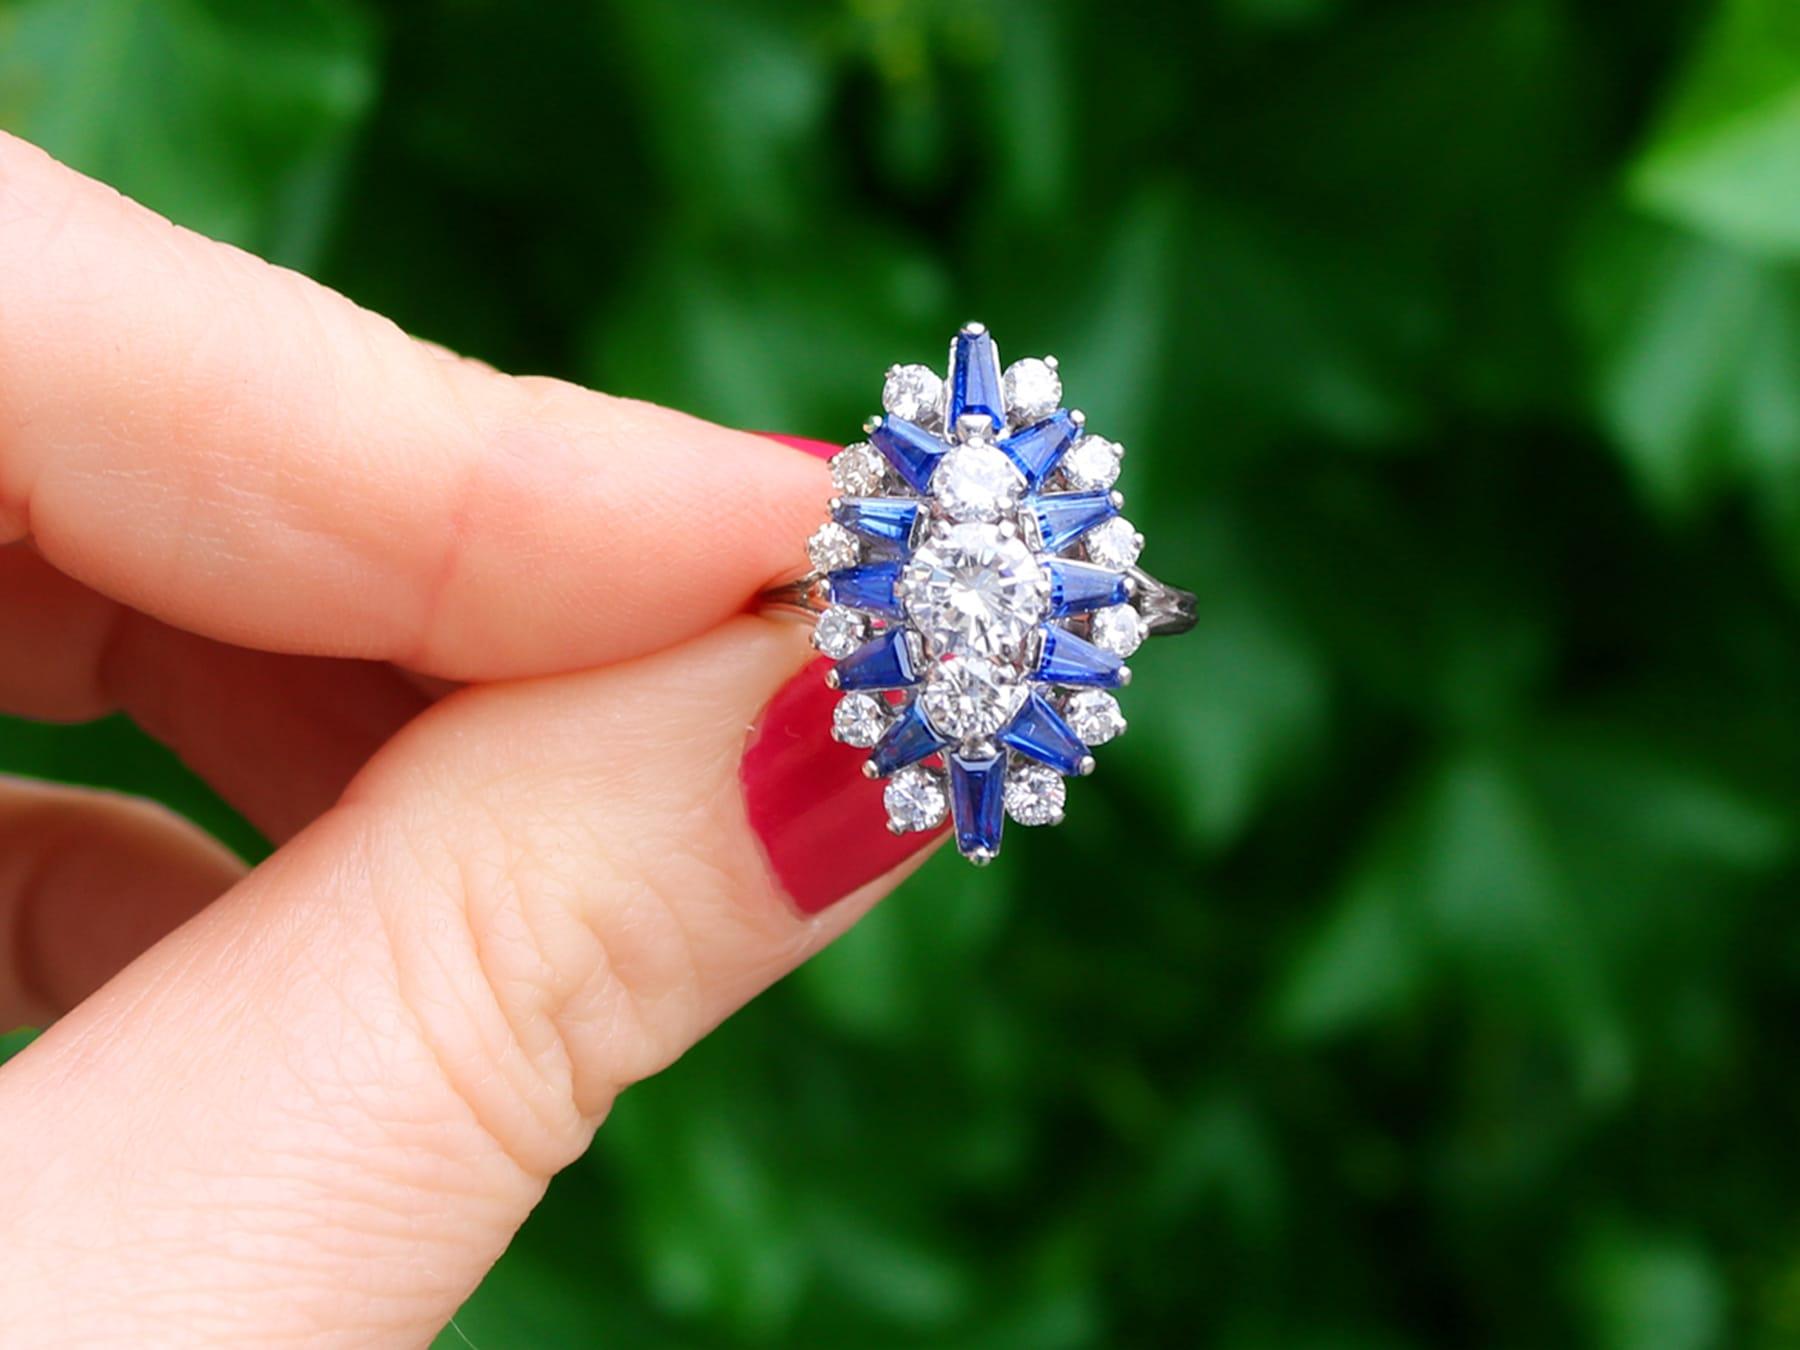 A stunning, fine and impressive vintage 1.85 carat blue sapphire and 1.76 carat diamond, 18 karat white gold cluster ring; part of our diverse vintage jewelry collections.

This stunning, fine and impressive vintage sapphire and diamond ring has